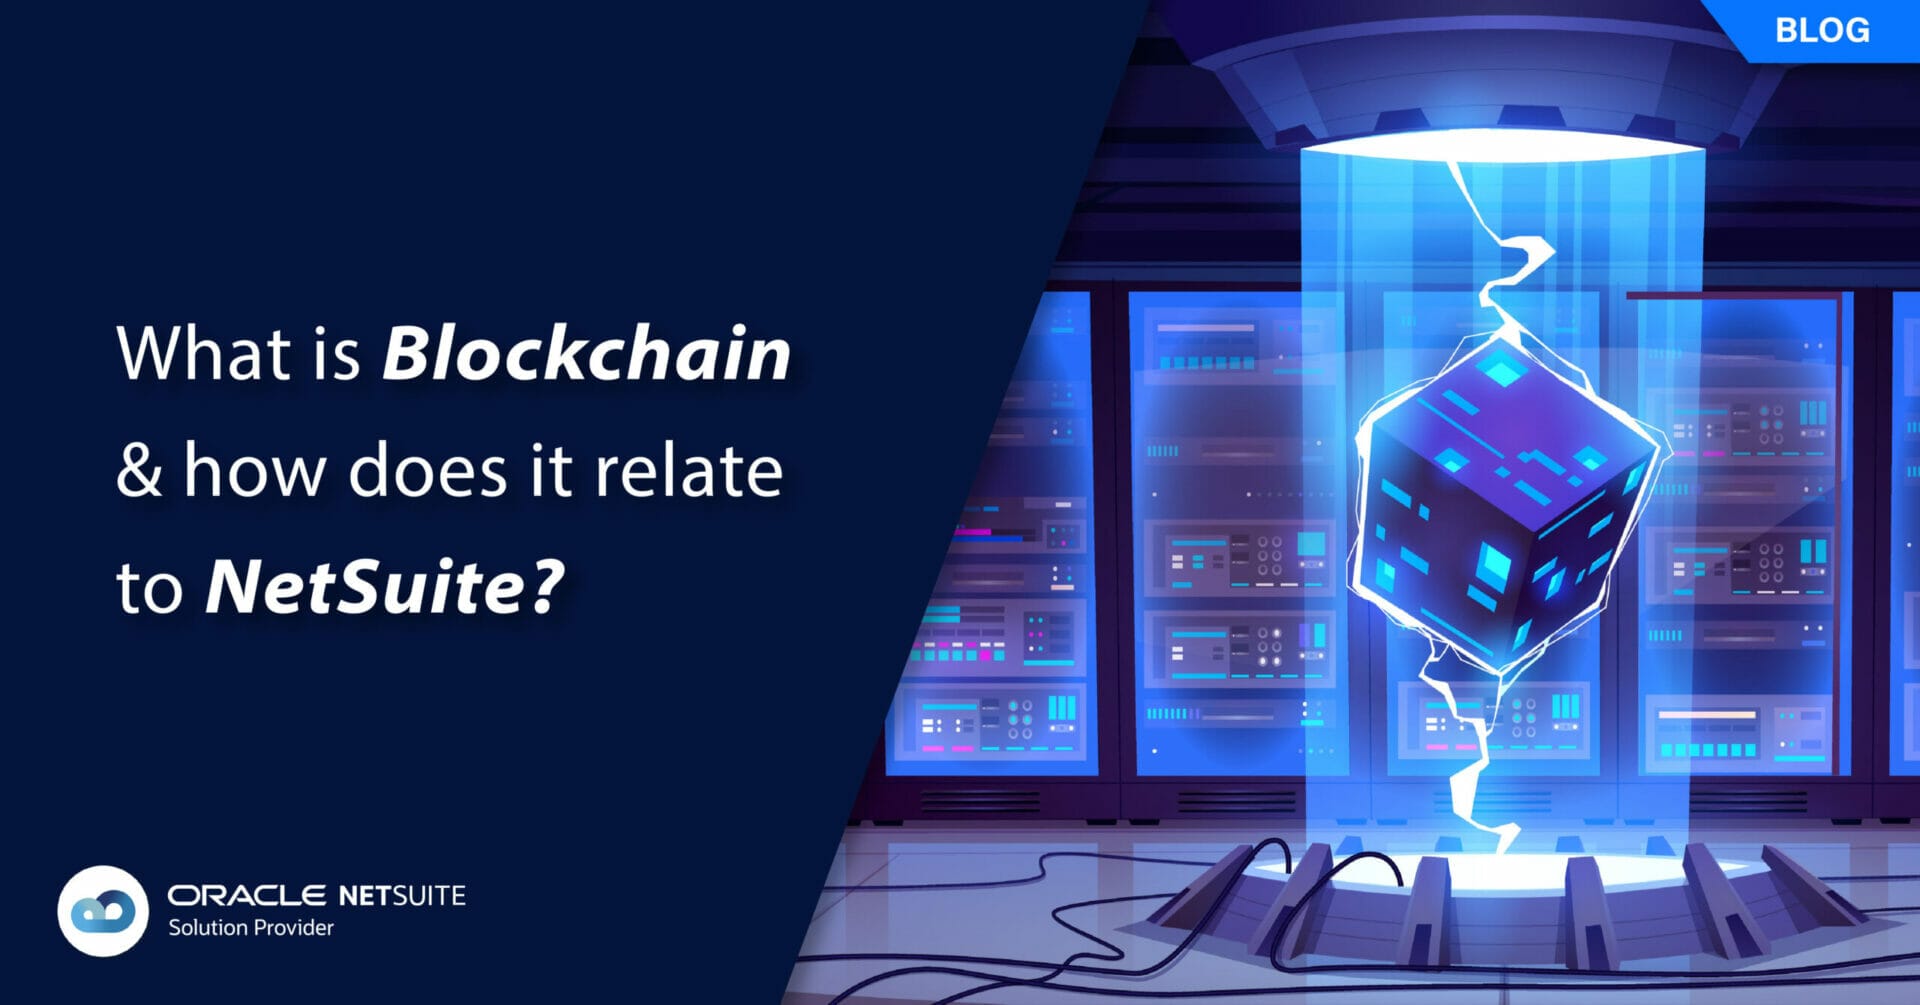 What is Blockchain & how does it relate to NetSuite?